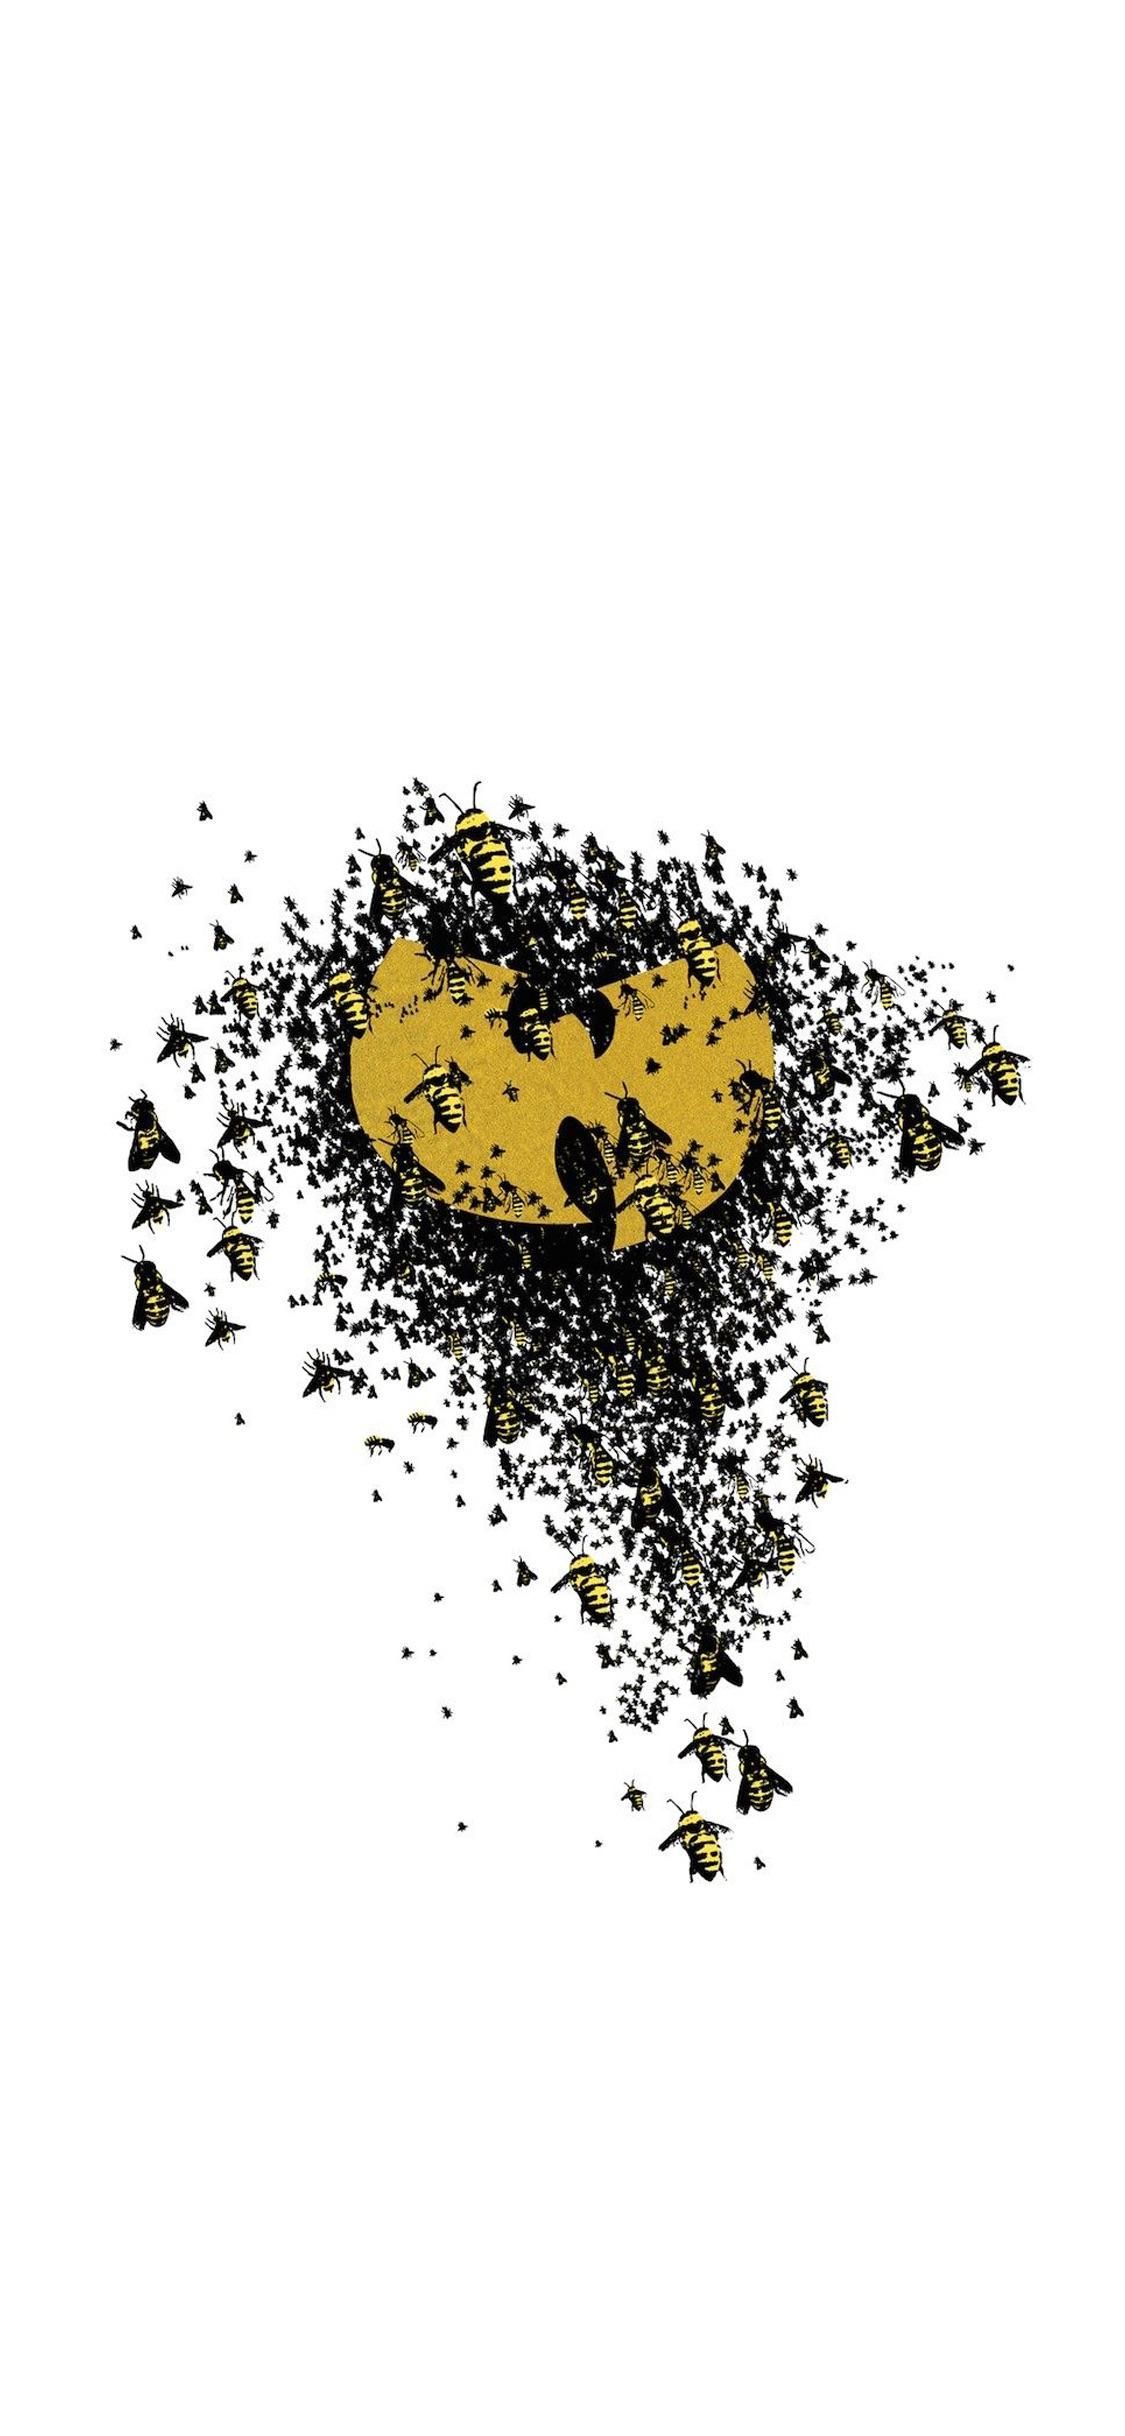 Wu Tang Art, Cropped, Chopped And Edited For The IPhone Xs Max